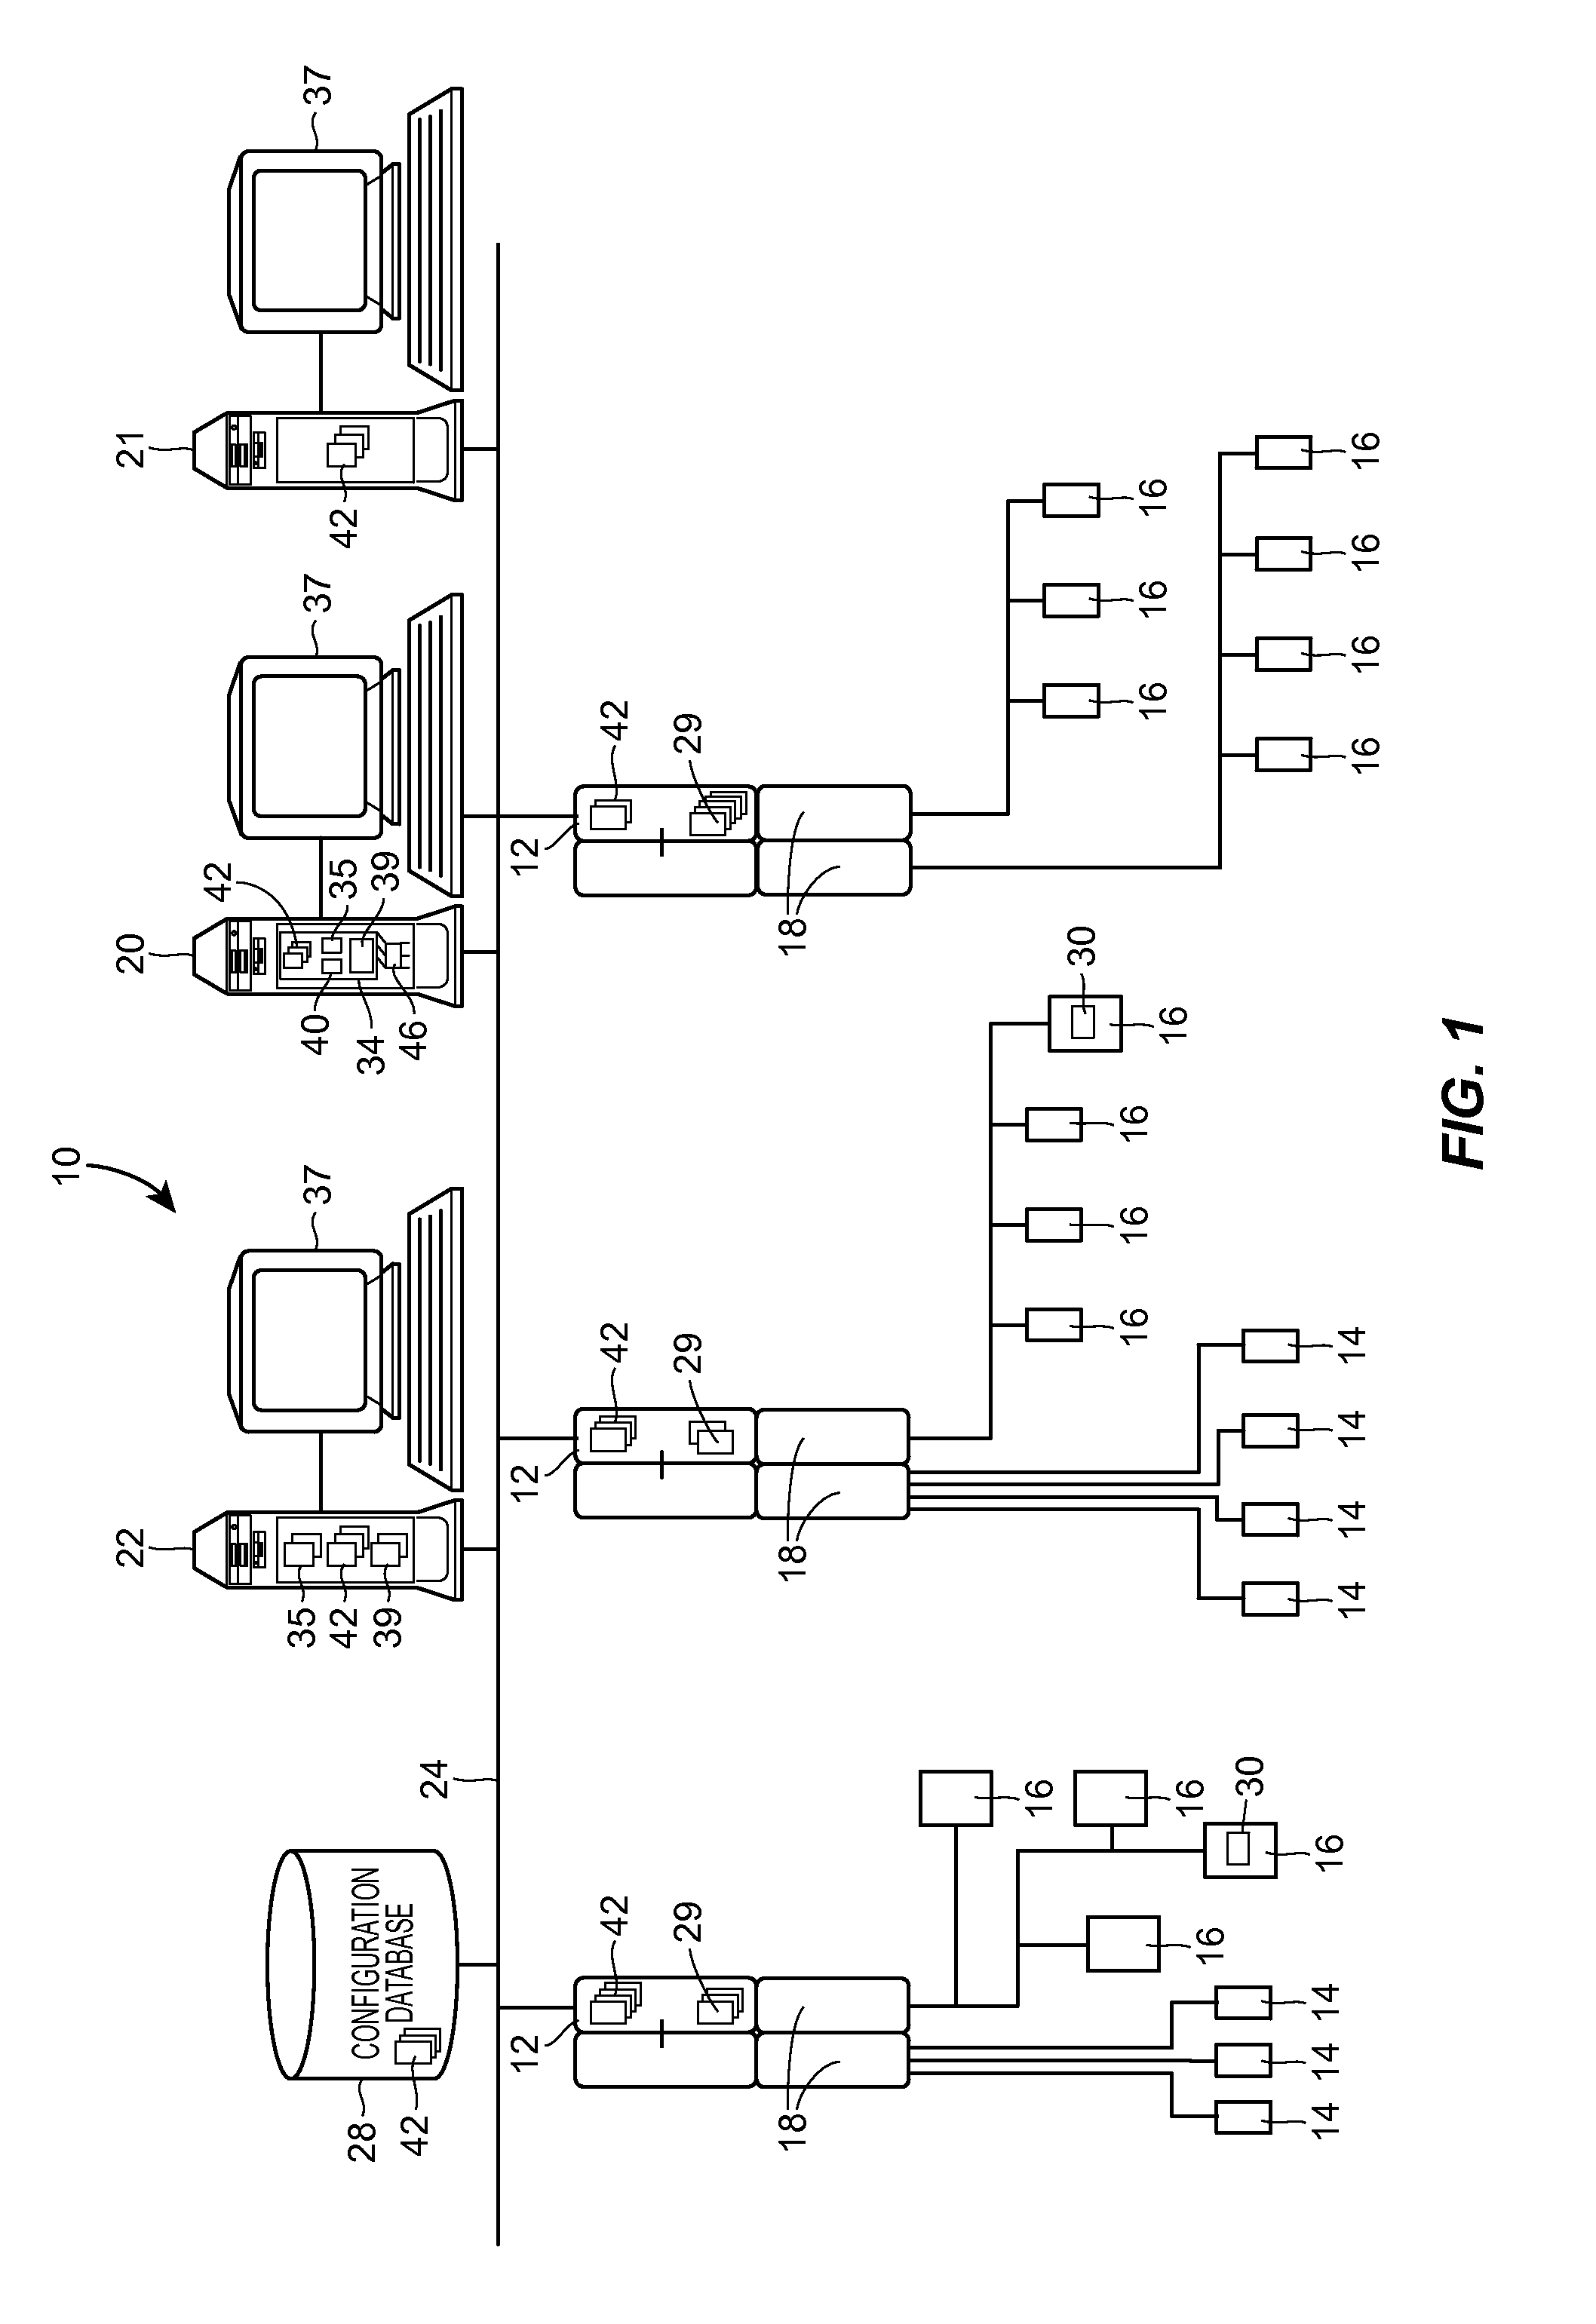 Hybrid sequential and simultaneous process simulation system